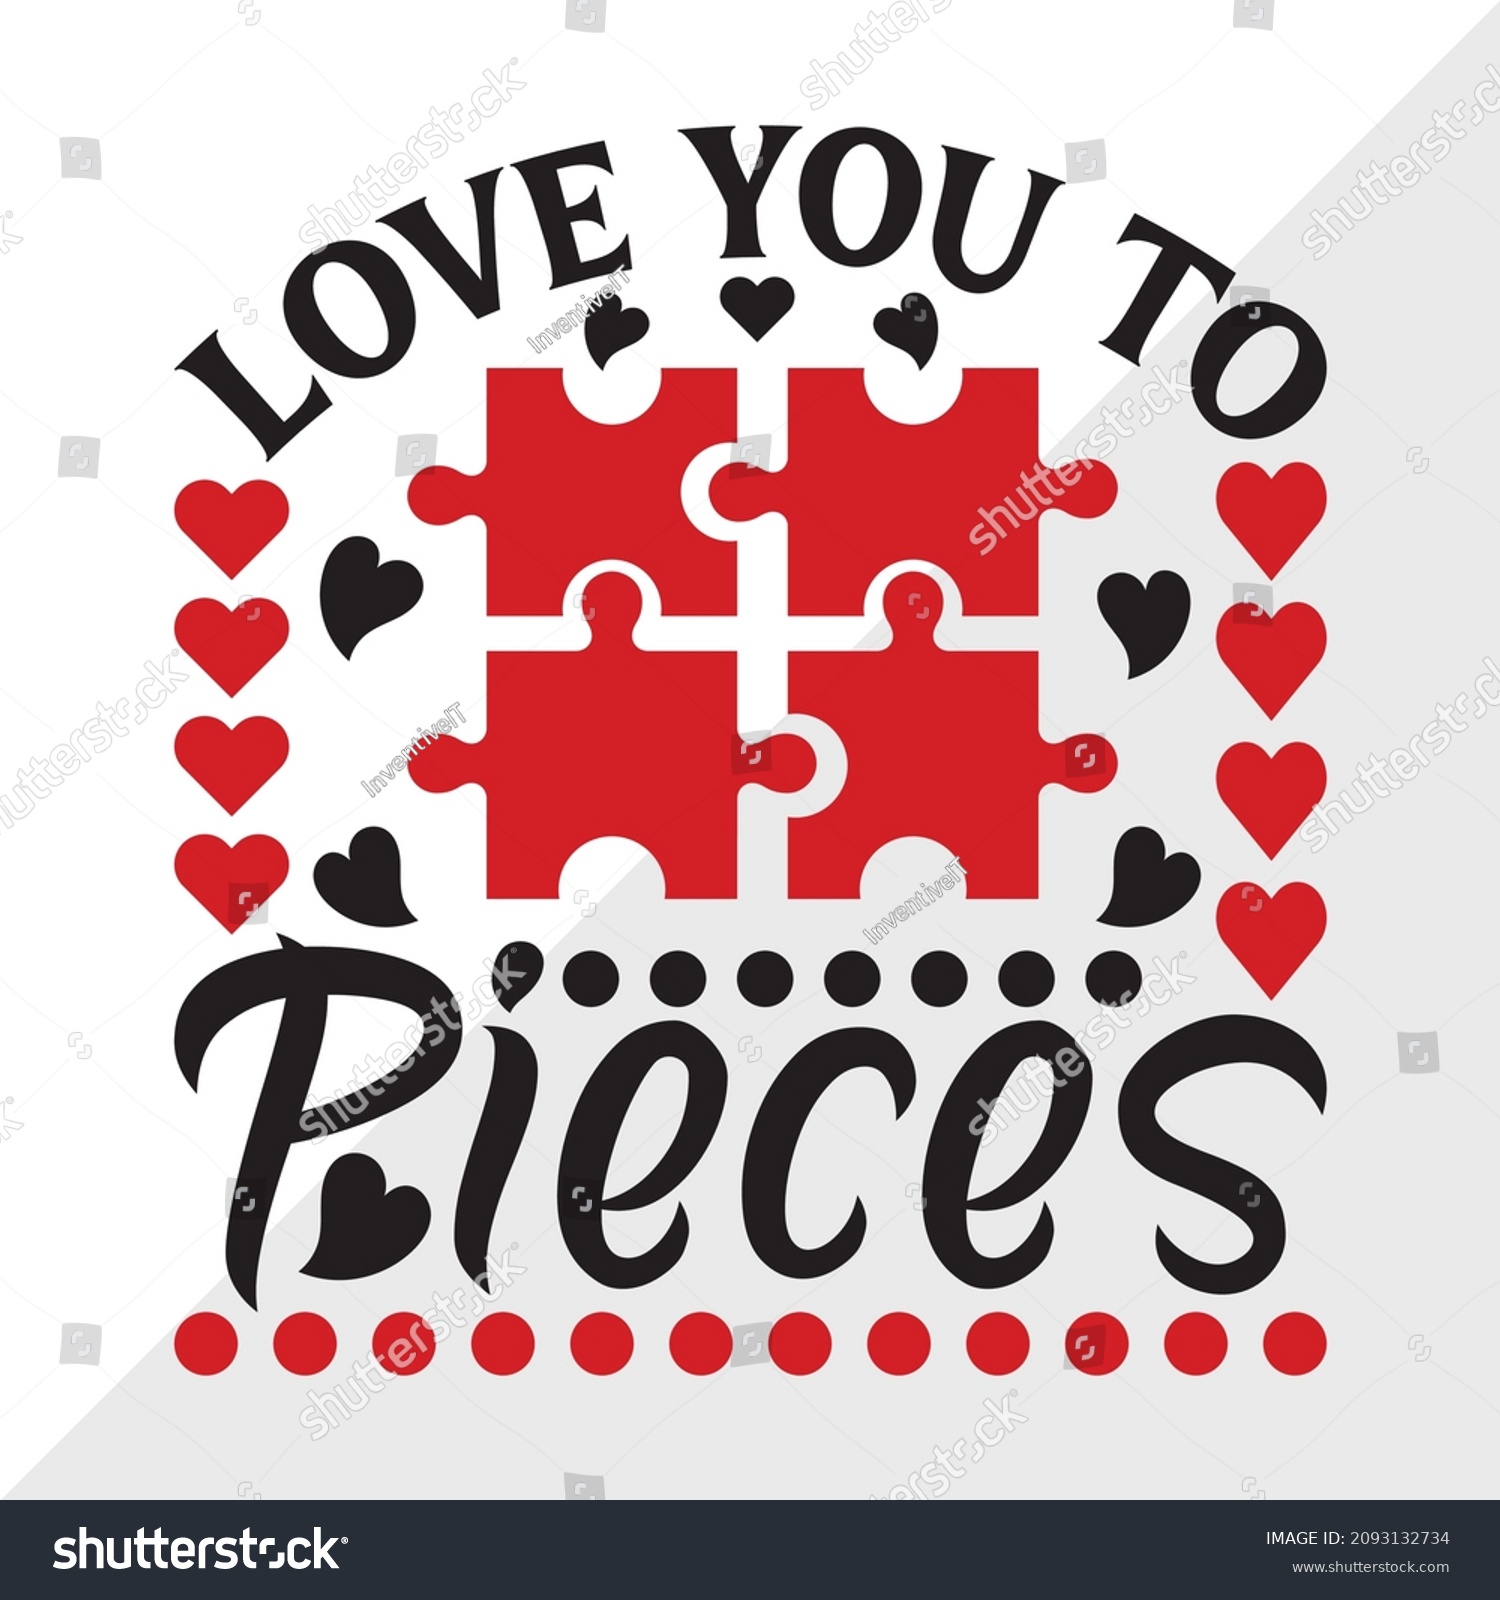 Love You Pieces Printable Vector Illustration